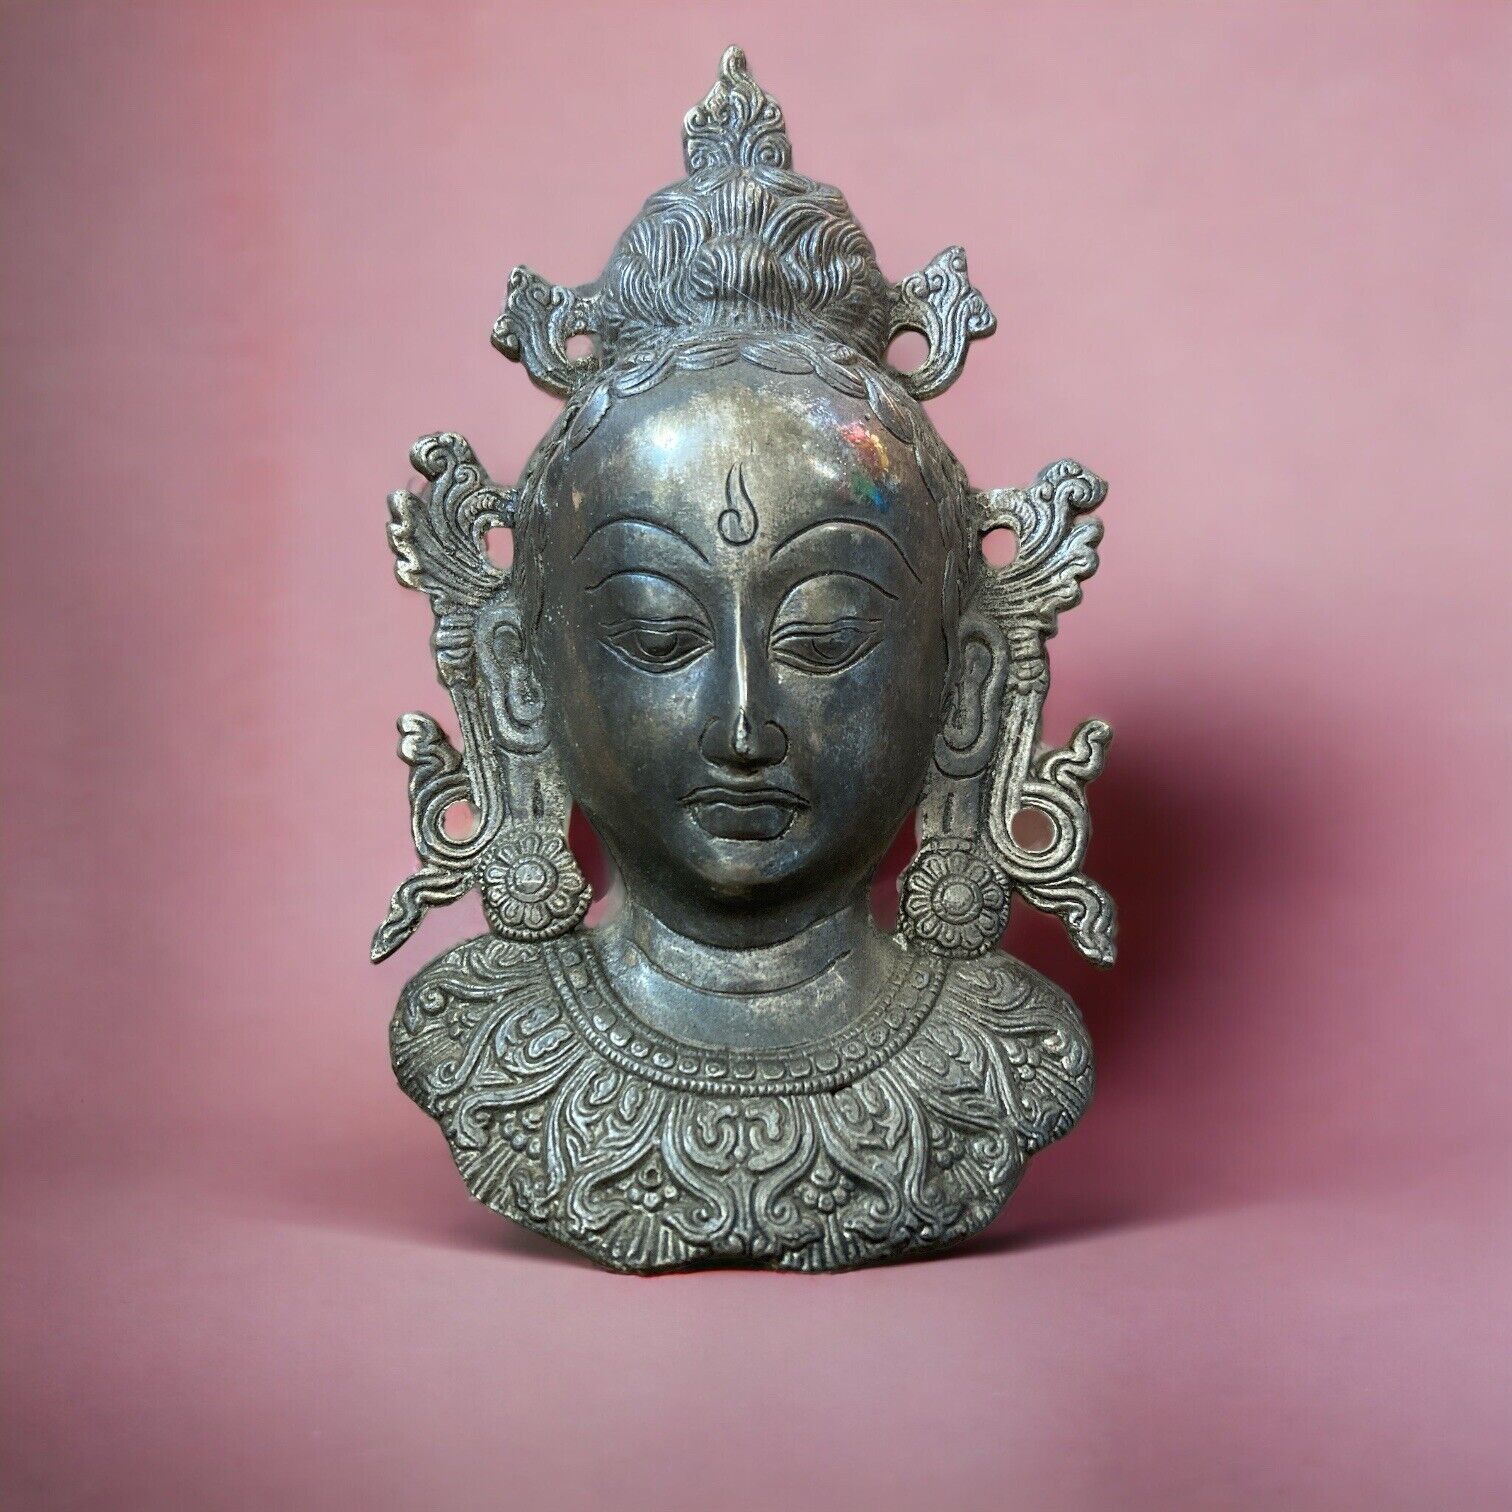 Vintage White Copper Tara Dolma Buddha 3D Relief Bust Wall Hanging